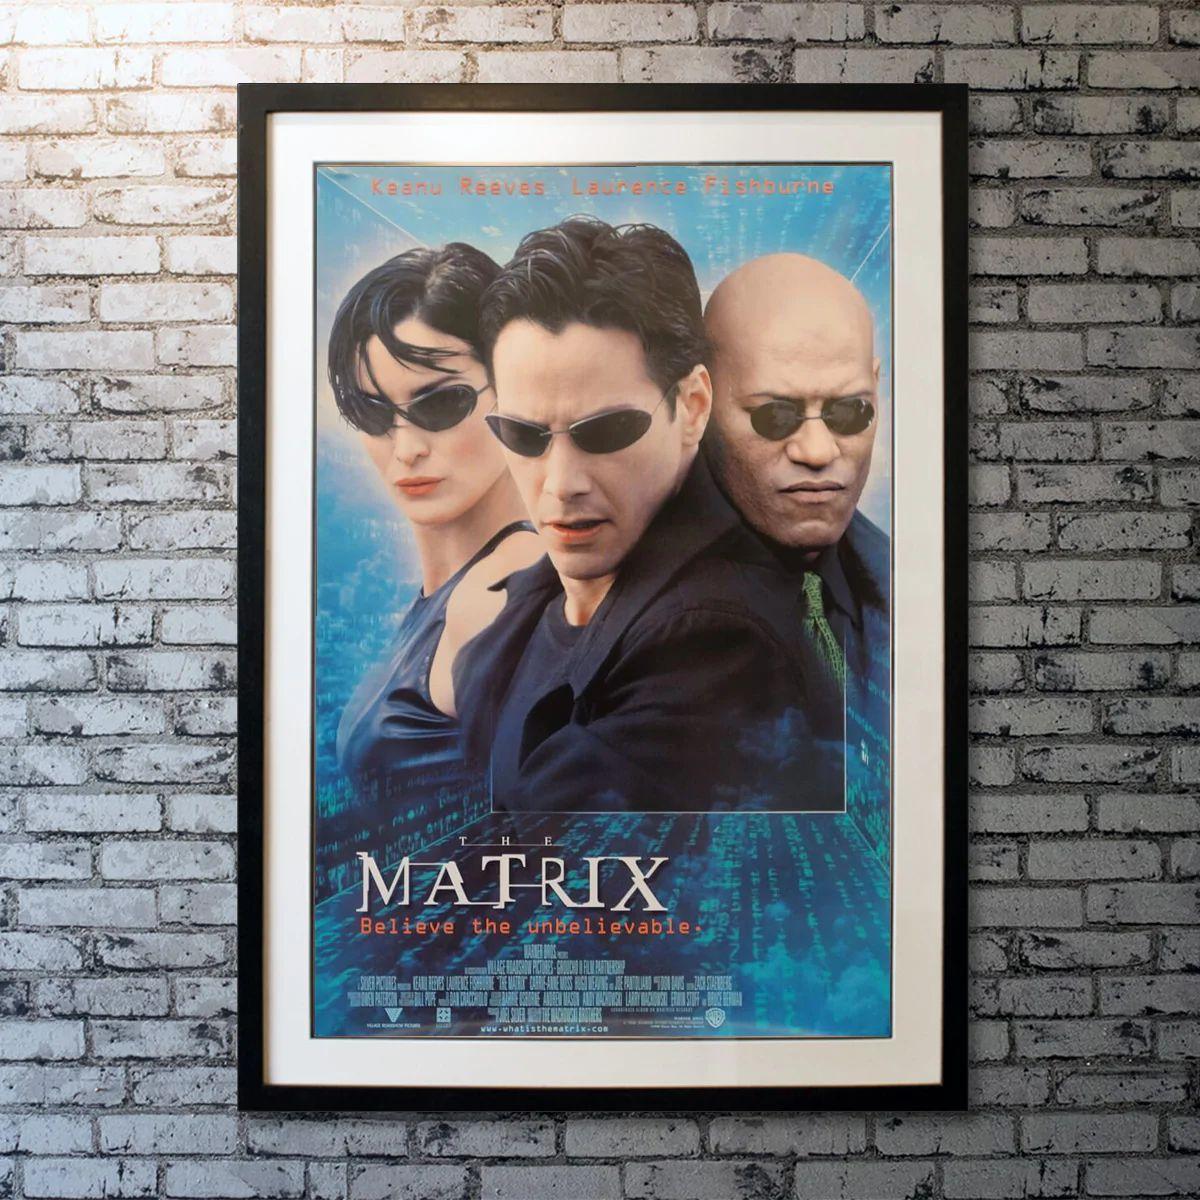 The Matrix, unframed poster, 1999

Original one sheet (27 X 41 Inches). When a beautiful stranger leads computer hacker Neo to a forbidding underworld, he discovers the shocking truth--the life he knows is the elaborate deception of an evil